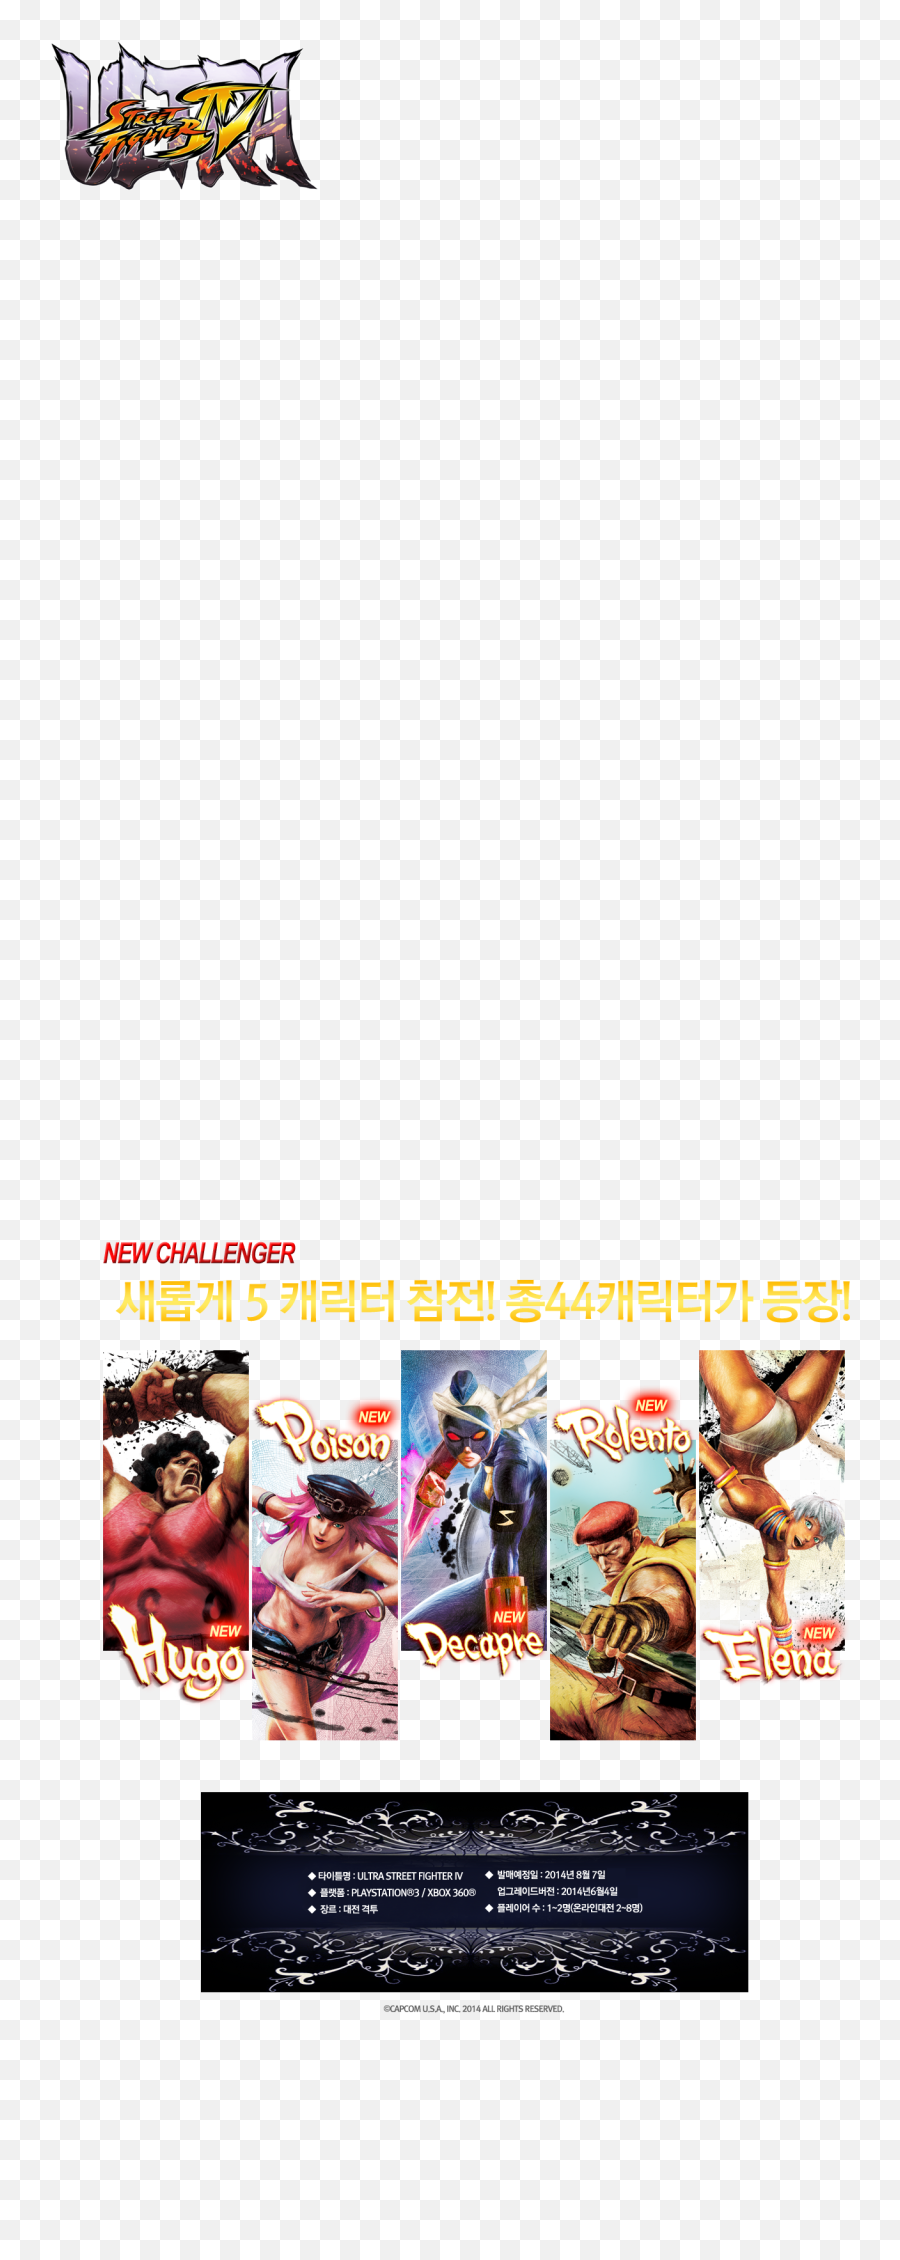 Street Fighter Full Size Png Download Seekpng - Street Fighter,Fighter Png